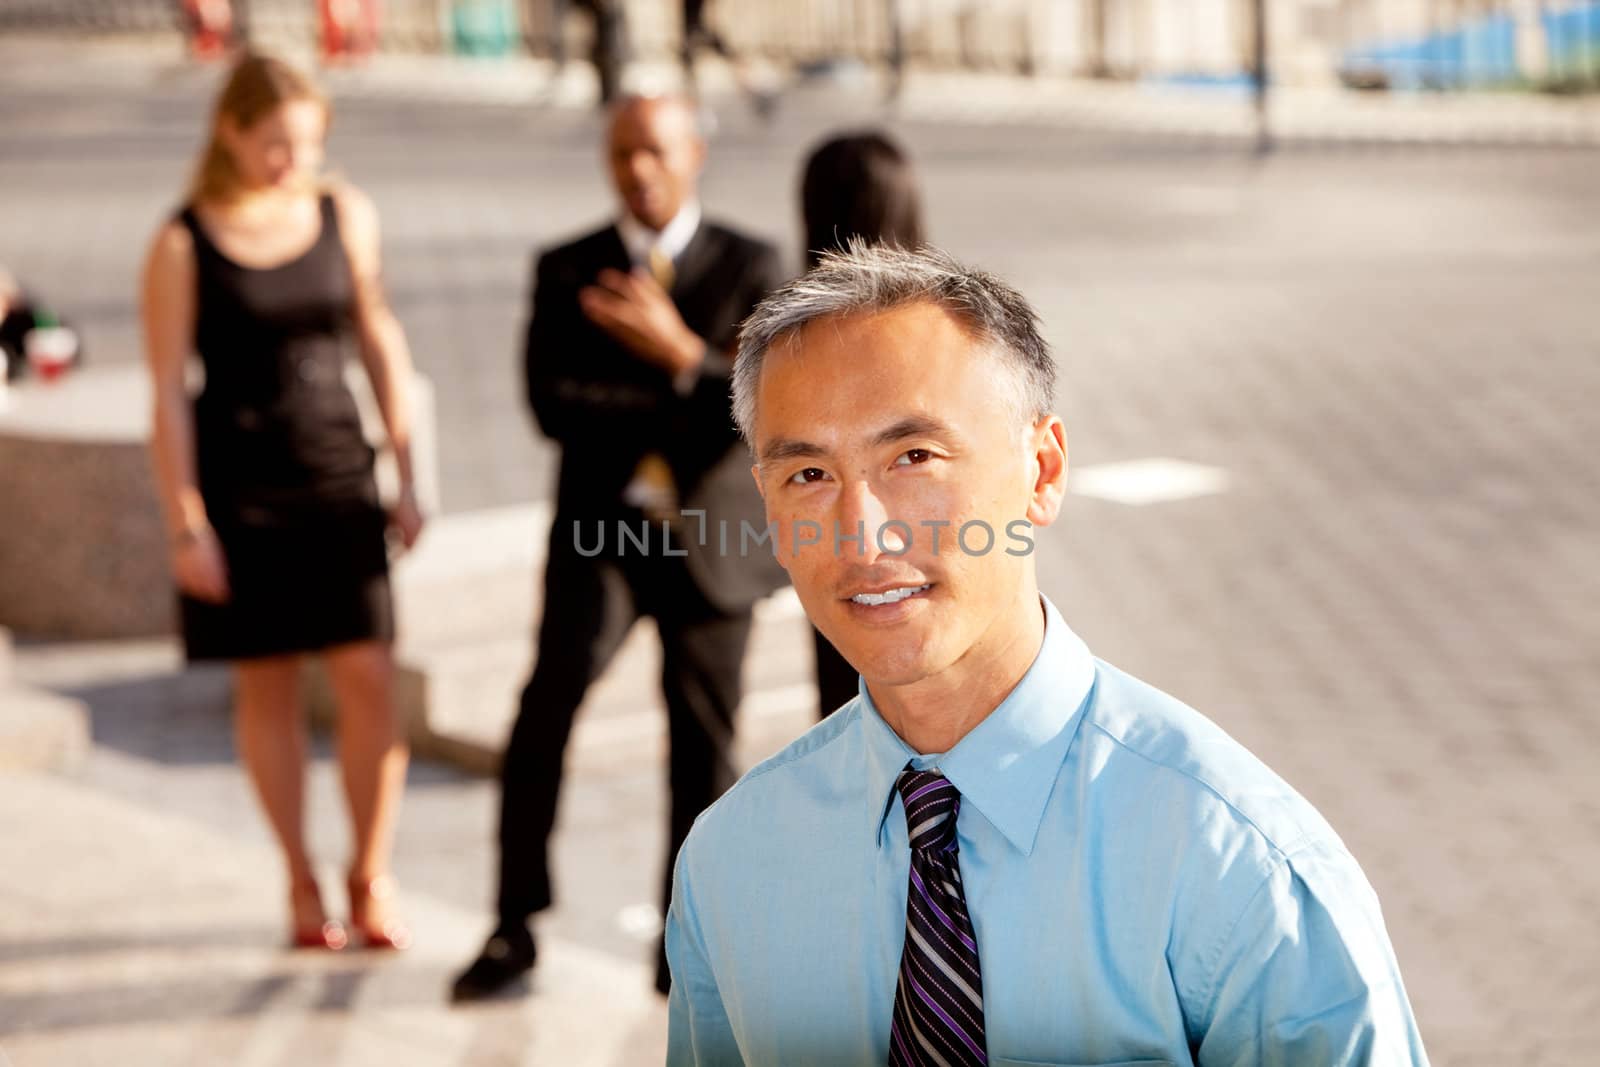 A casual business man with colleagues in the background - outdoor portrait